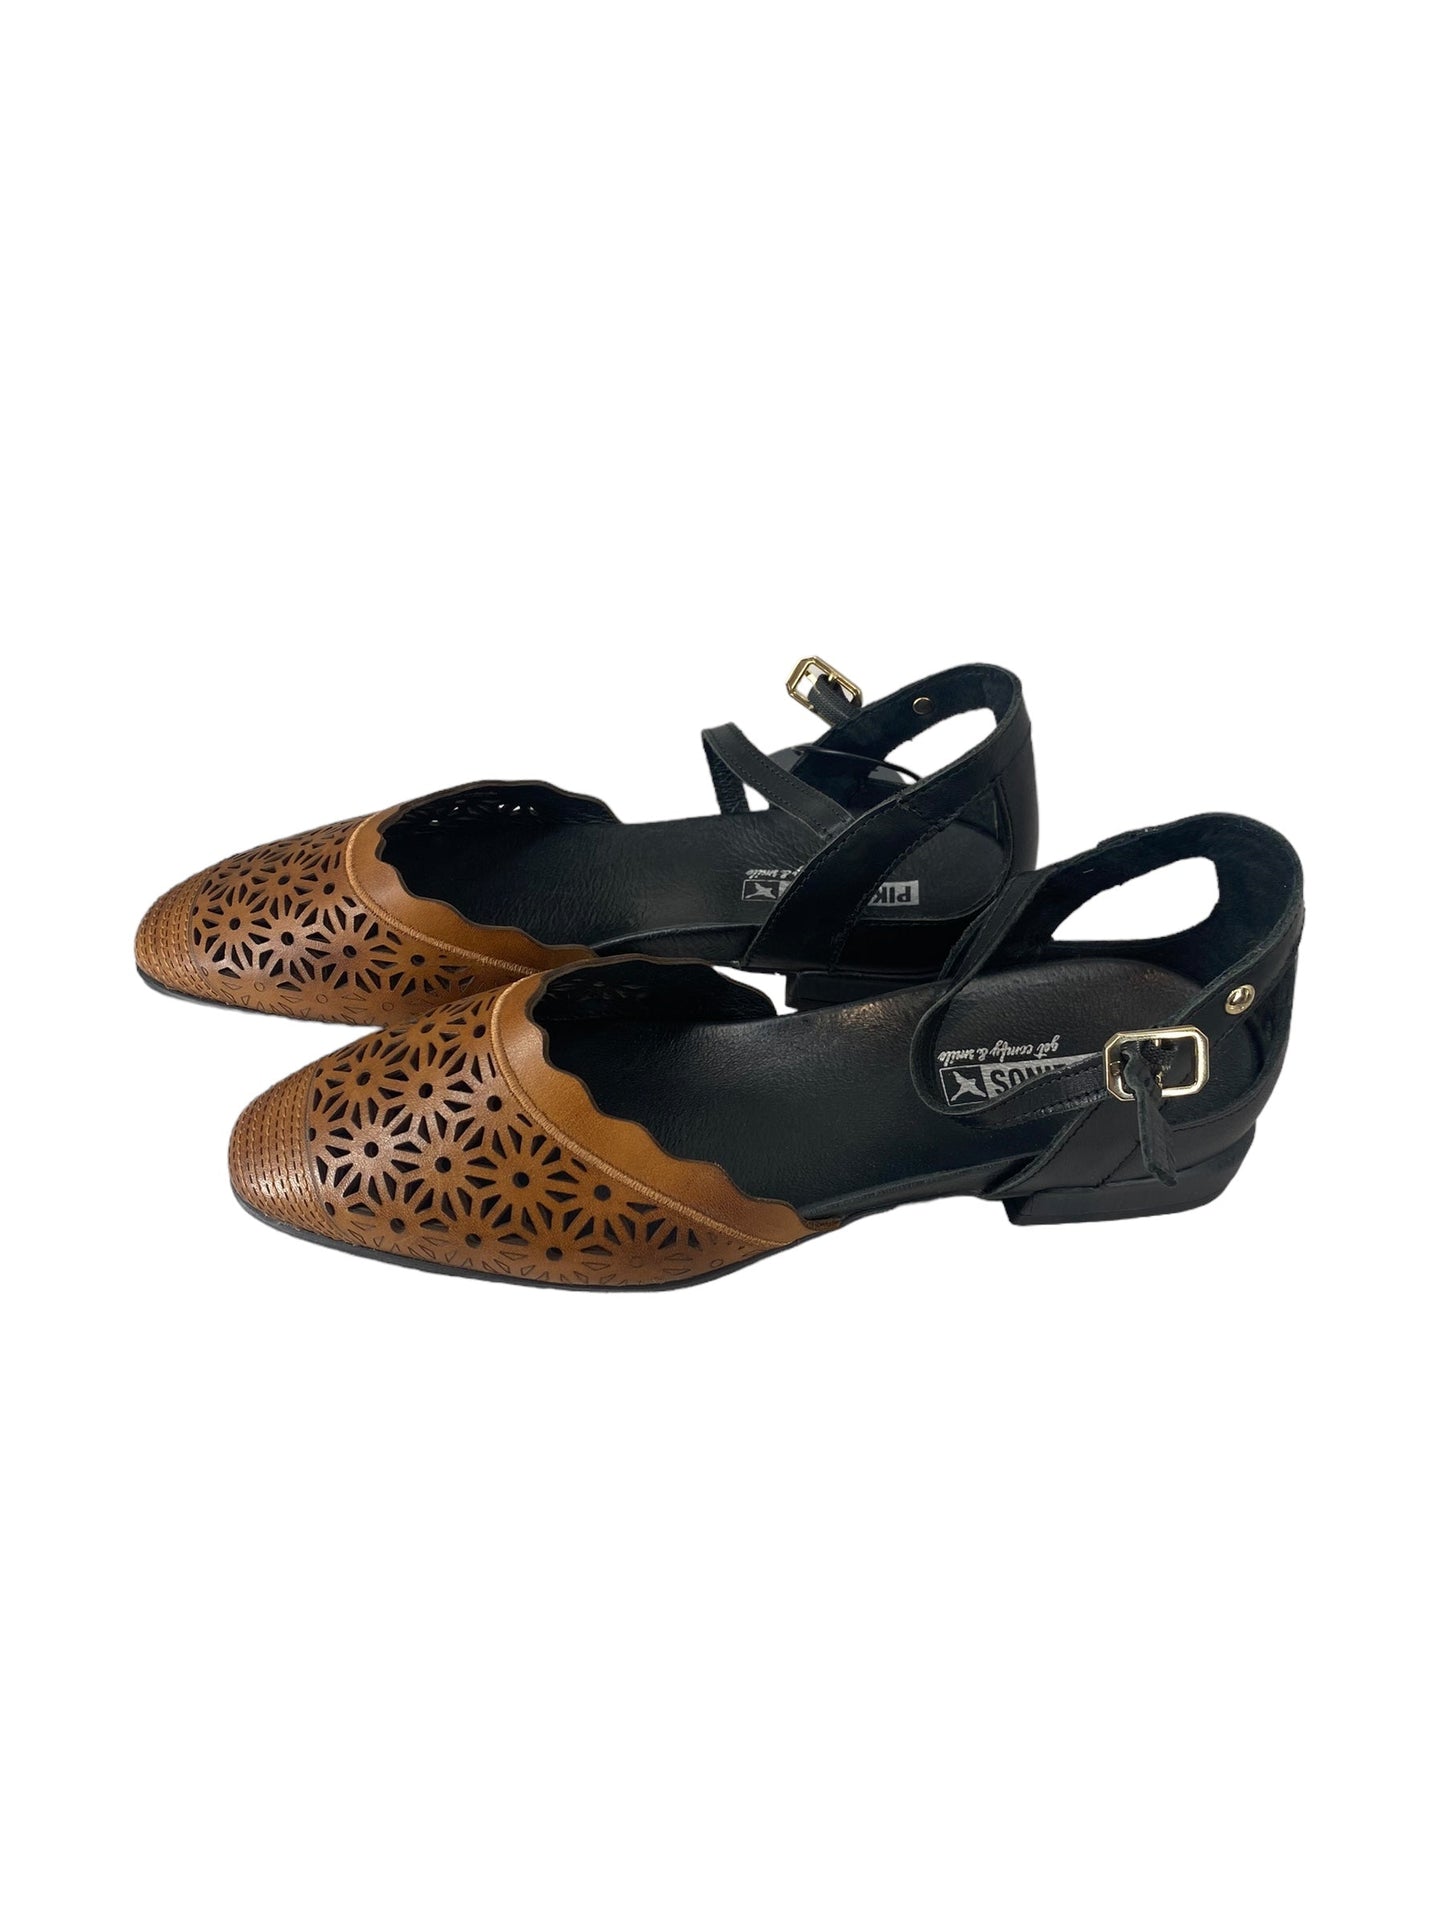 Black & Brown Shoes Flats Pikolinos, Size 6.5